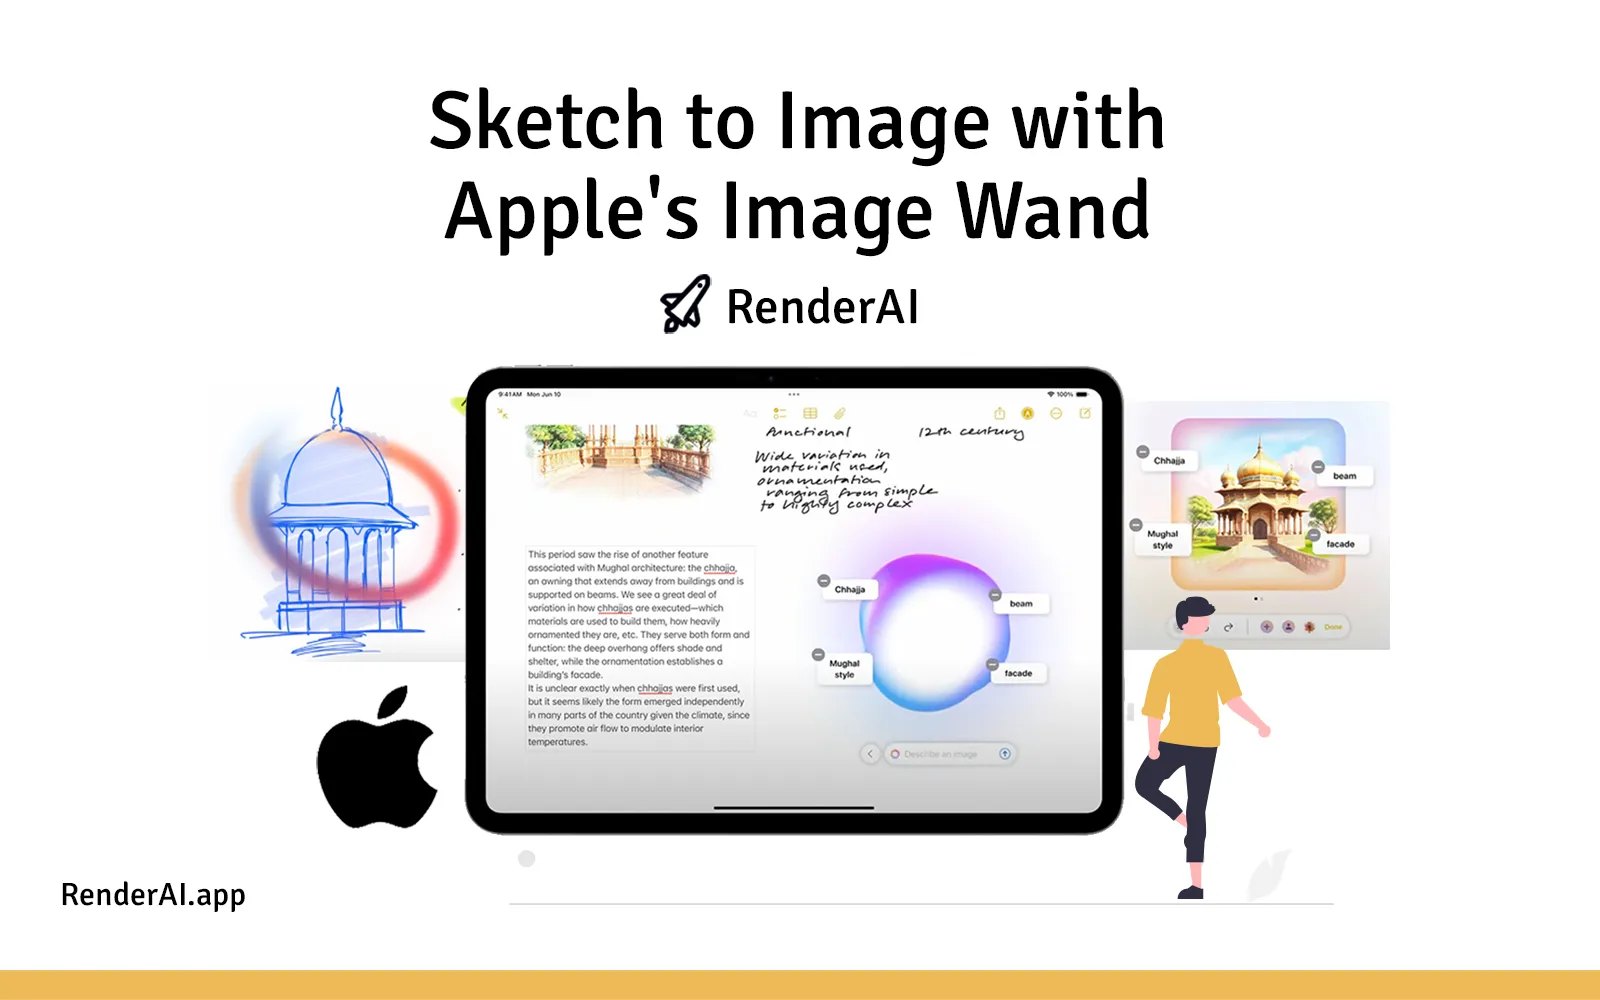 Transforming Sketch to Image with Apple's Image Wand